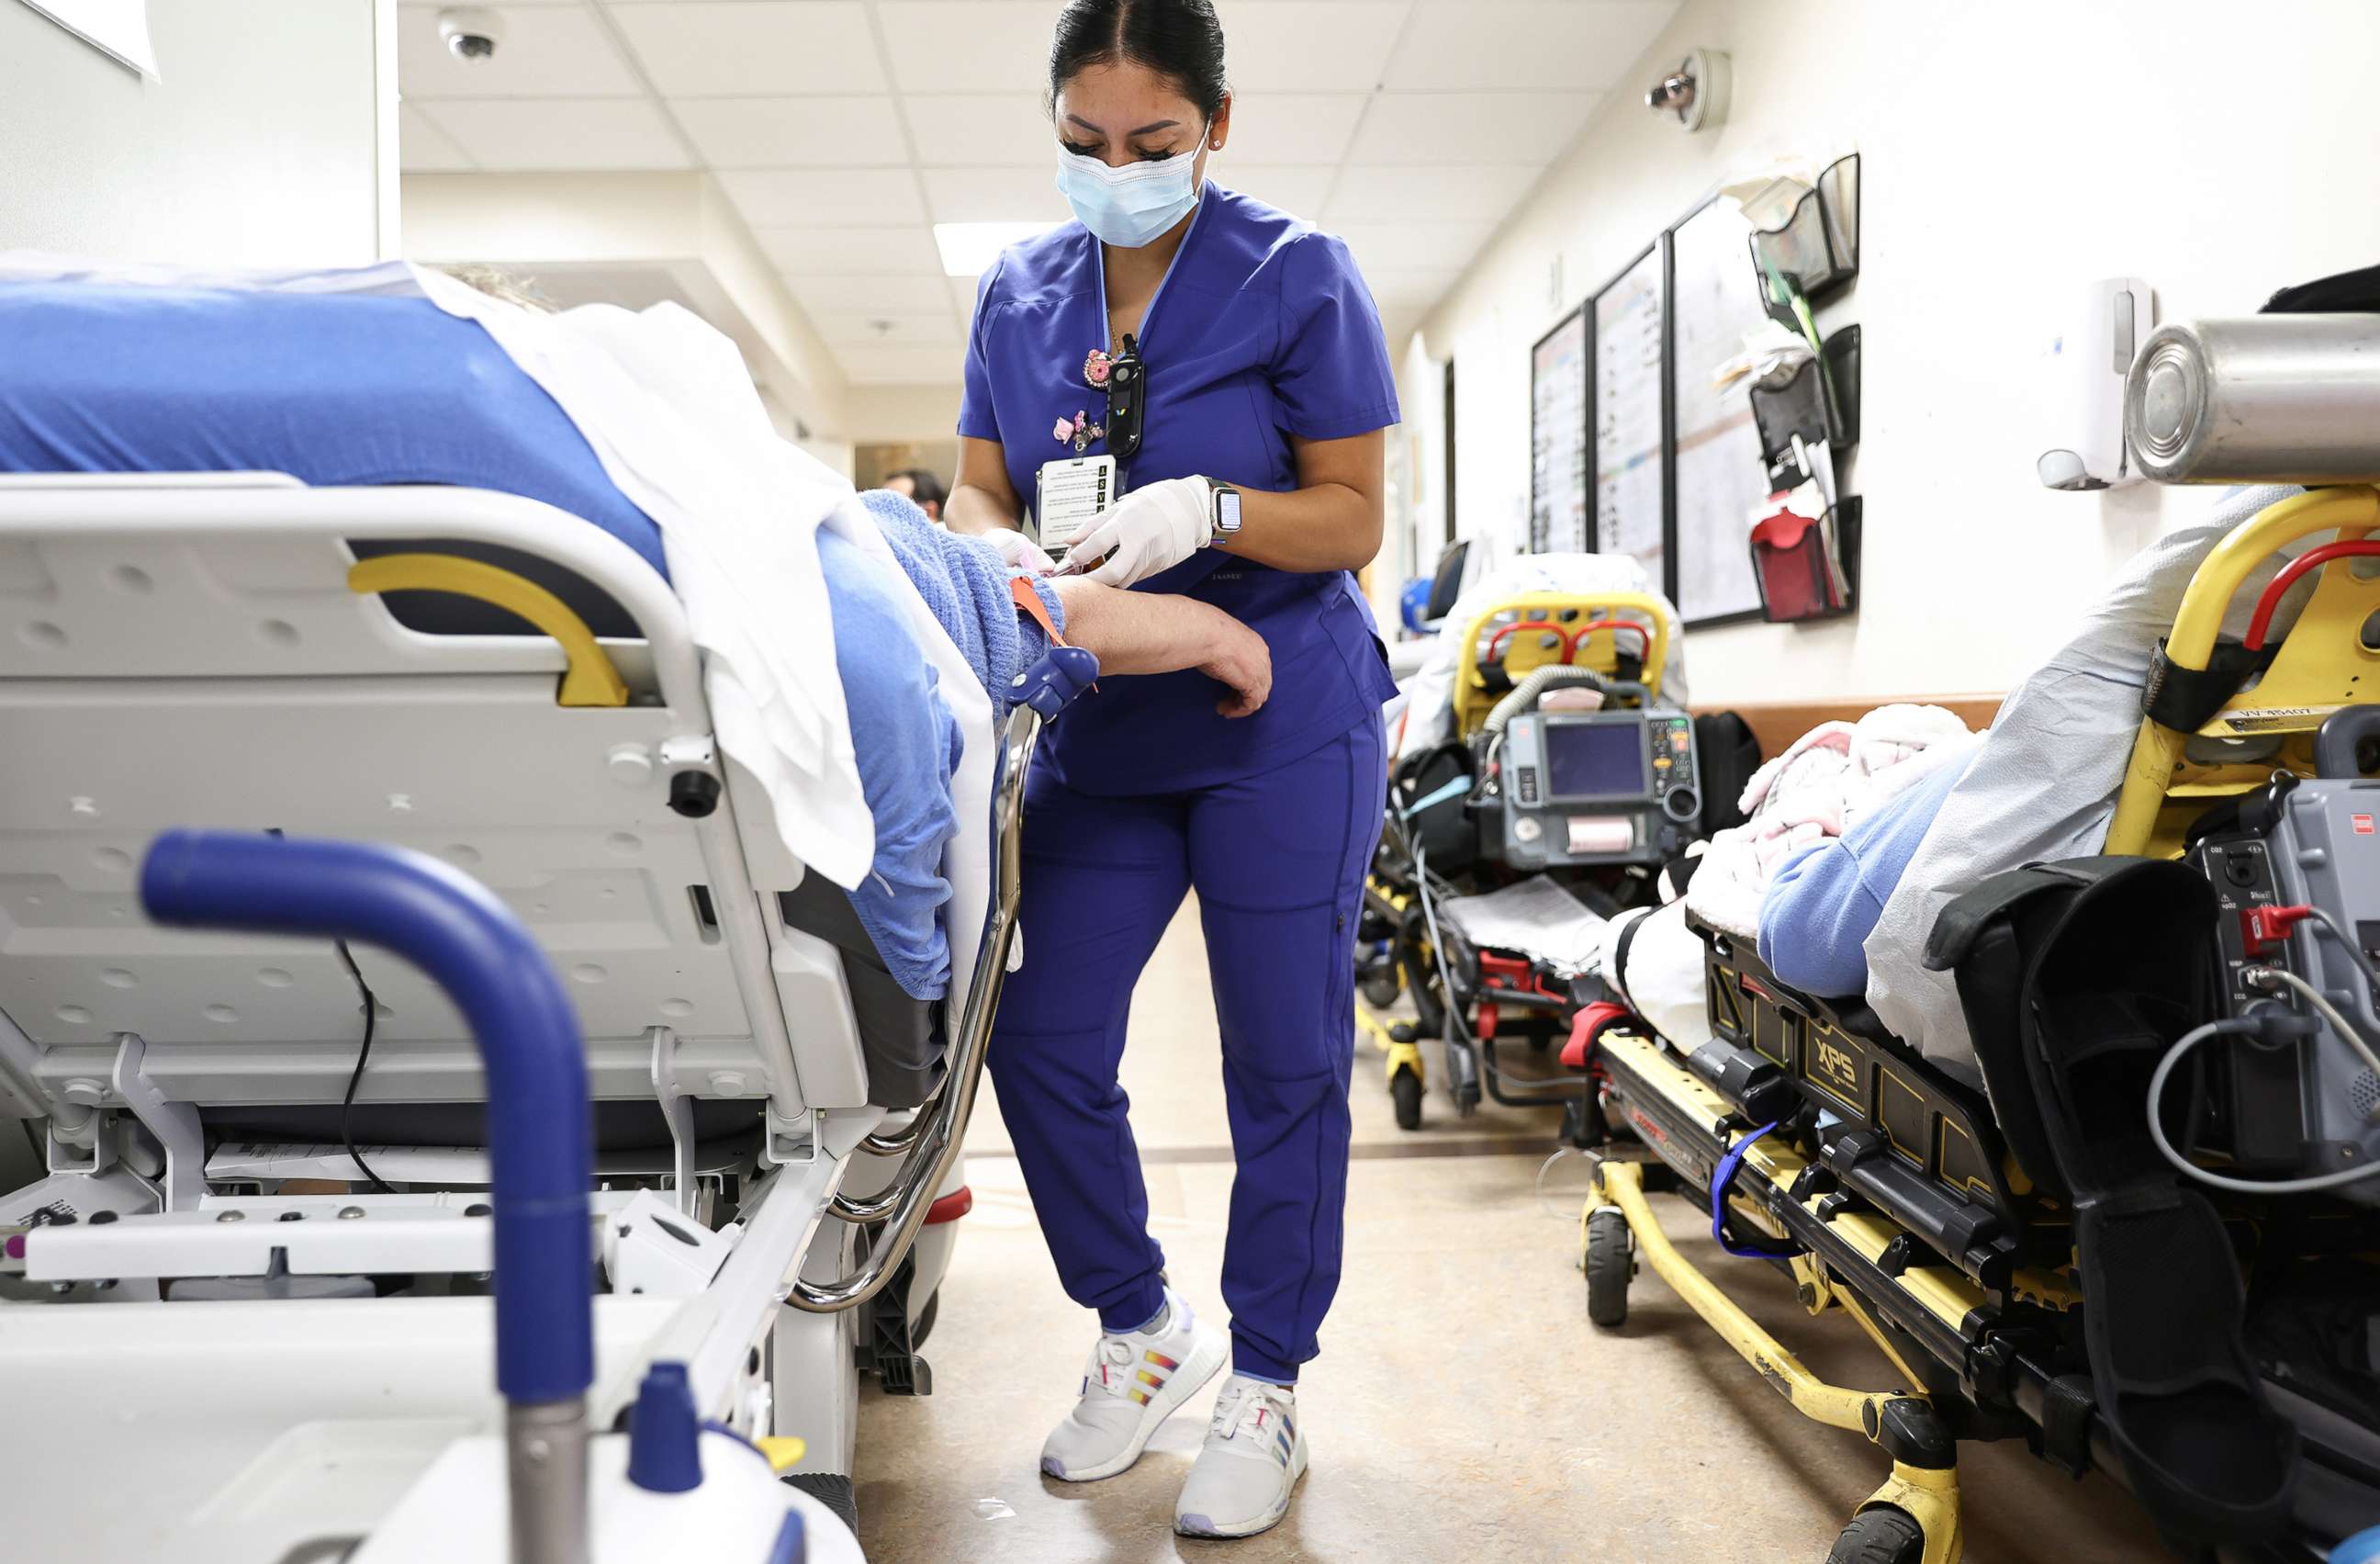 PHOTO: Lab technician Alejandra Sanchez cares for a patient in the Emergency Department at Providence St. Mary Medical Center in Apple Valley, Calif., March 11, 2022.